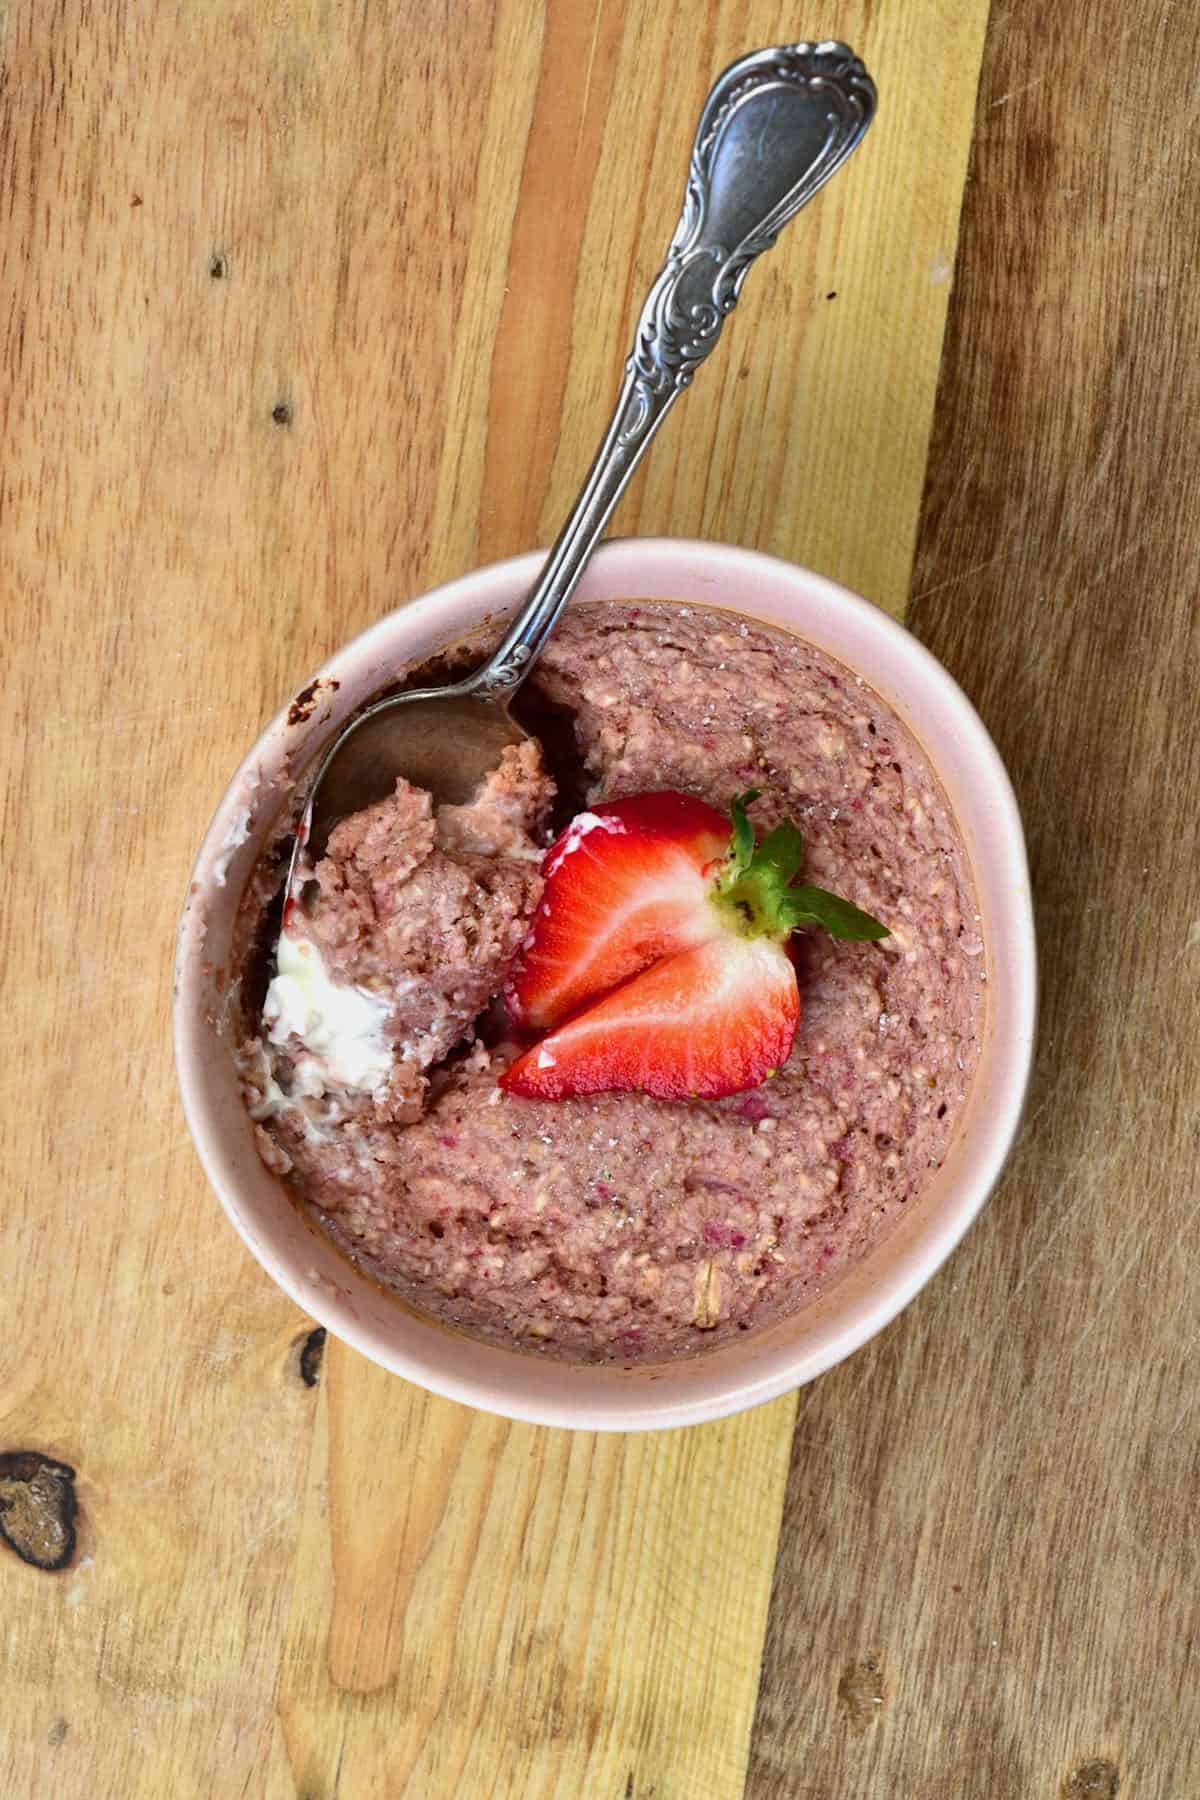 A spoon digged into strawberry baked oats